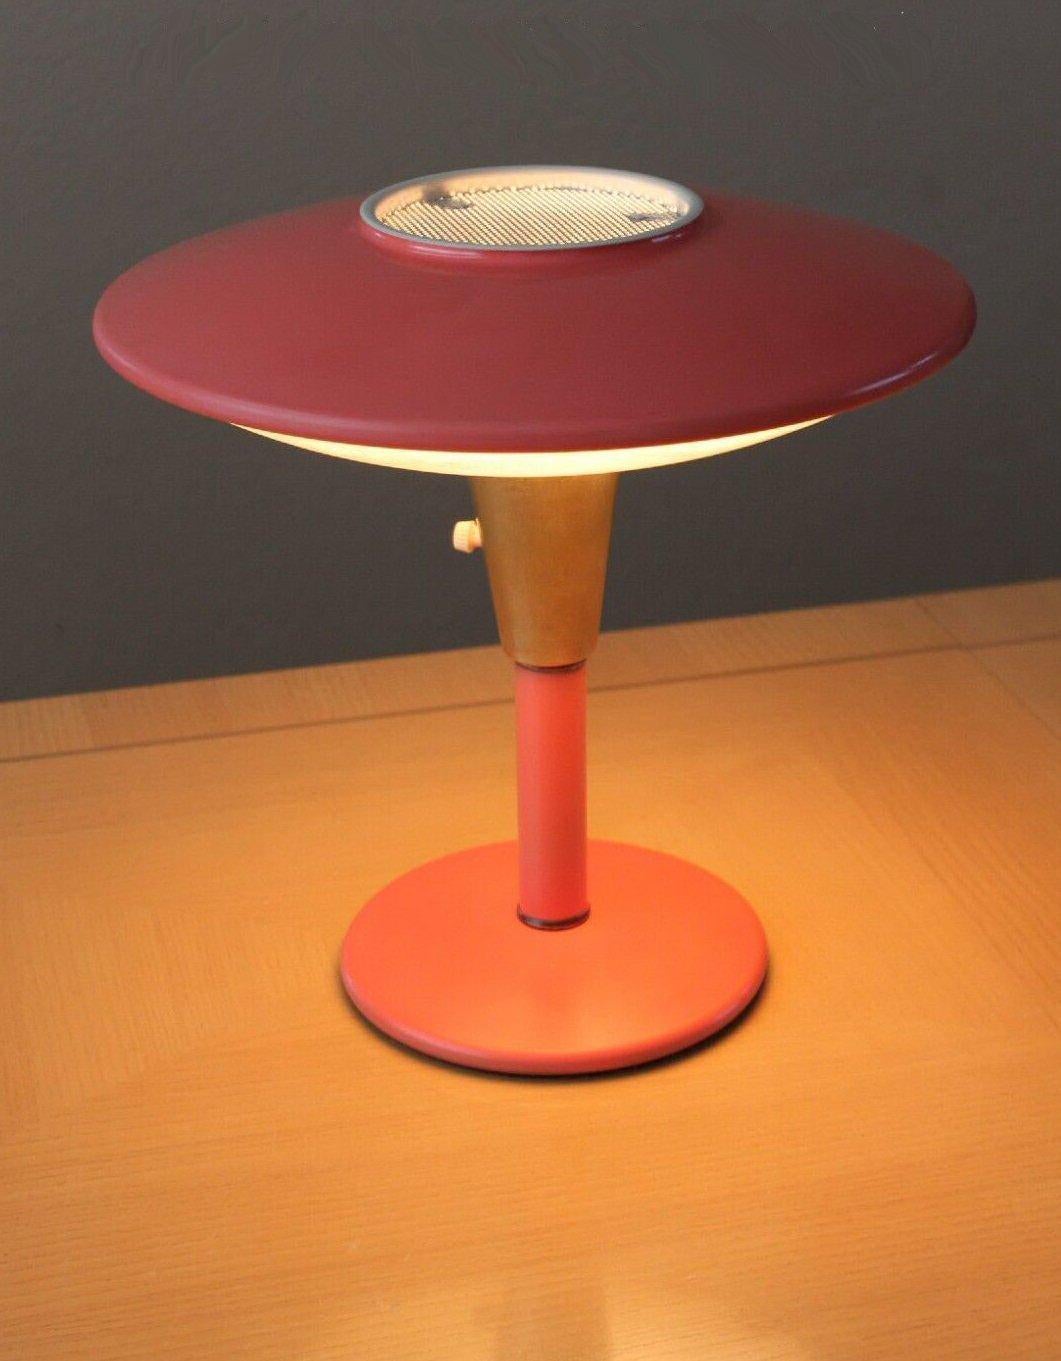 This Exquisite Dazor Mid Century Saucer Desk lamp
is an iconic treasure from the glorious 1950s.

The saucer design is iconic.  Flying saucers were all the
rage in the fifties and this gave people their own
'flying saucer' lamp! 

A work of art